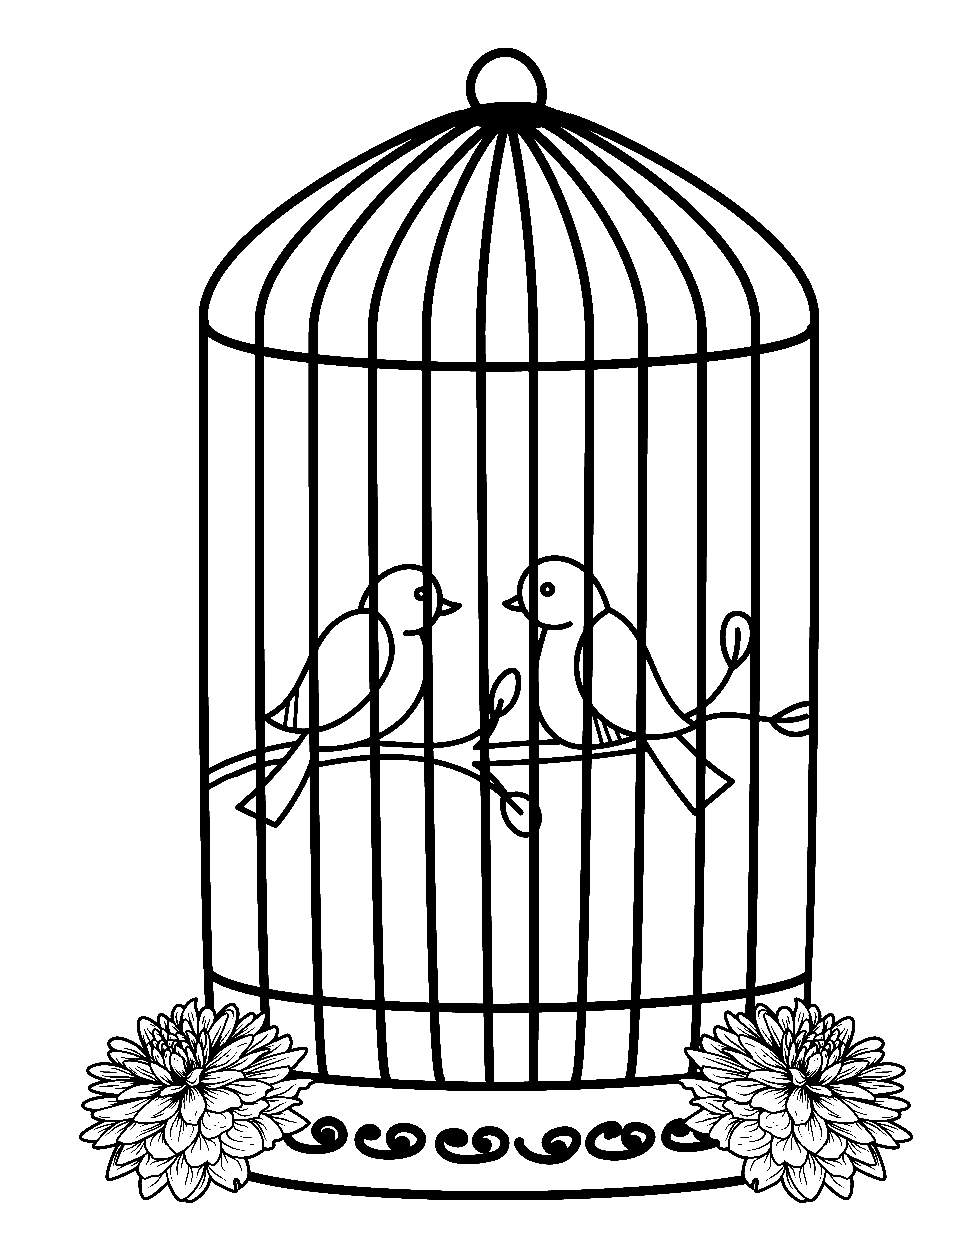 Lovebirds in a Cage Coloring Page - Two birds sitting together in a decorative cage.